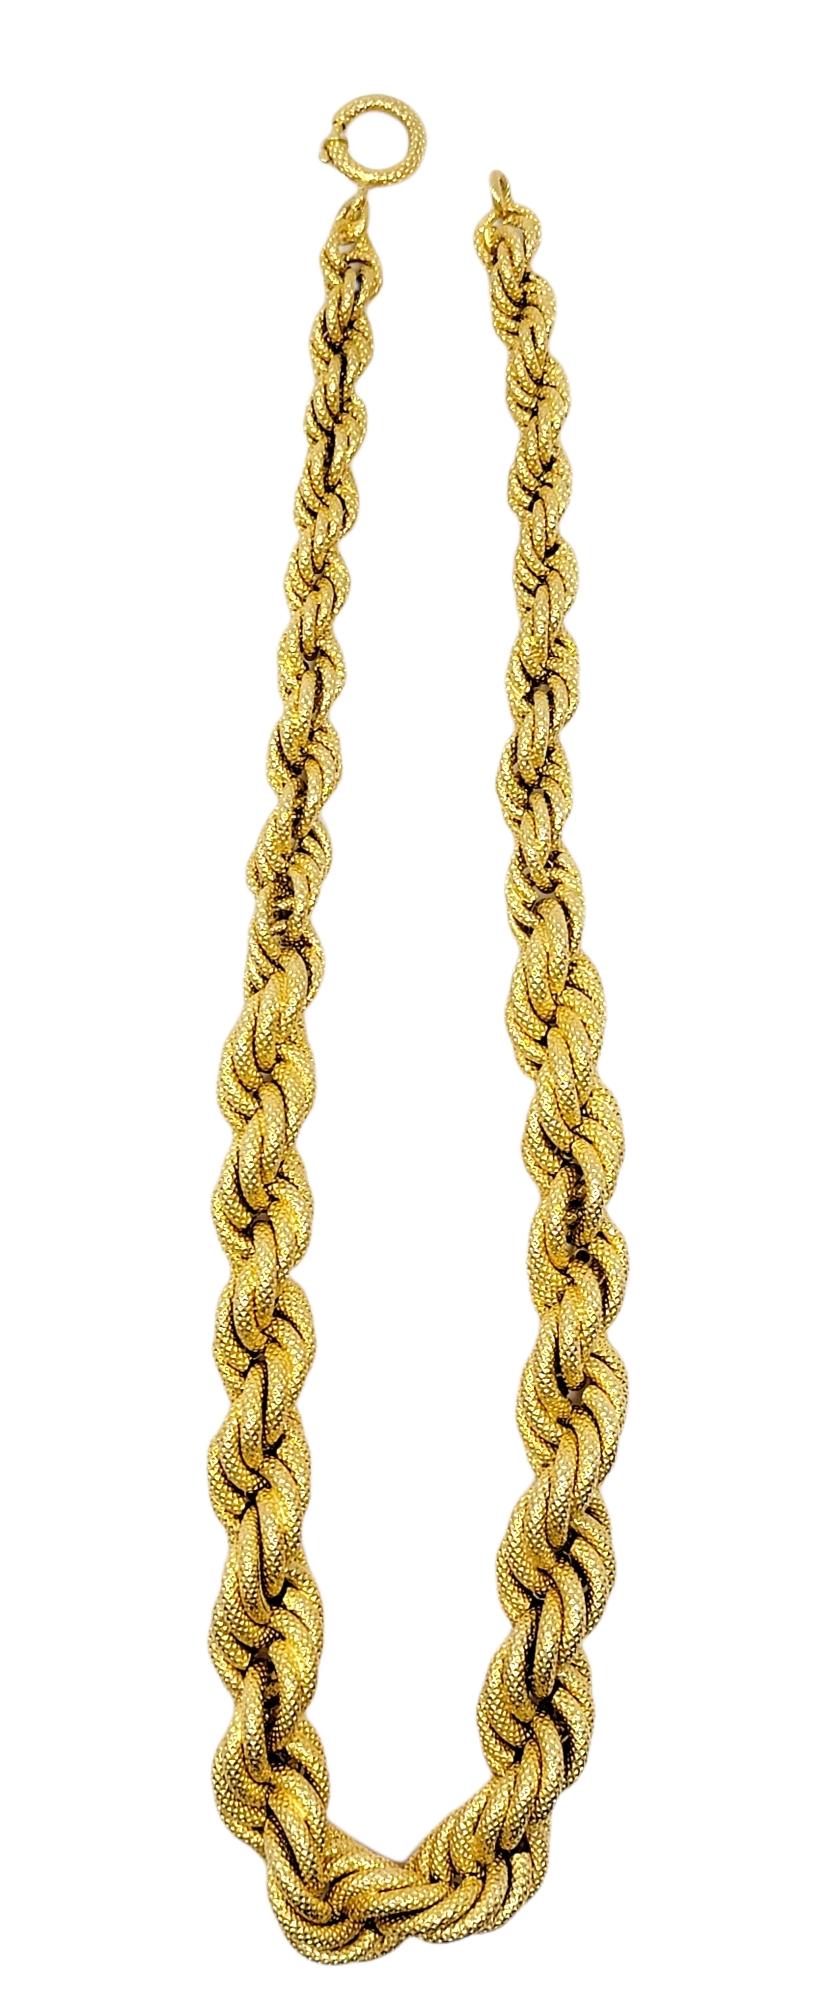 Contemporary Textured 18 Karat Yellow Gold Heavy Graduated Rope Link Necklace